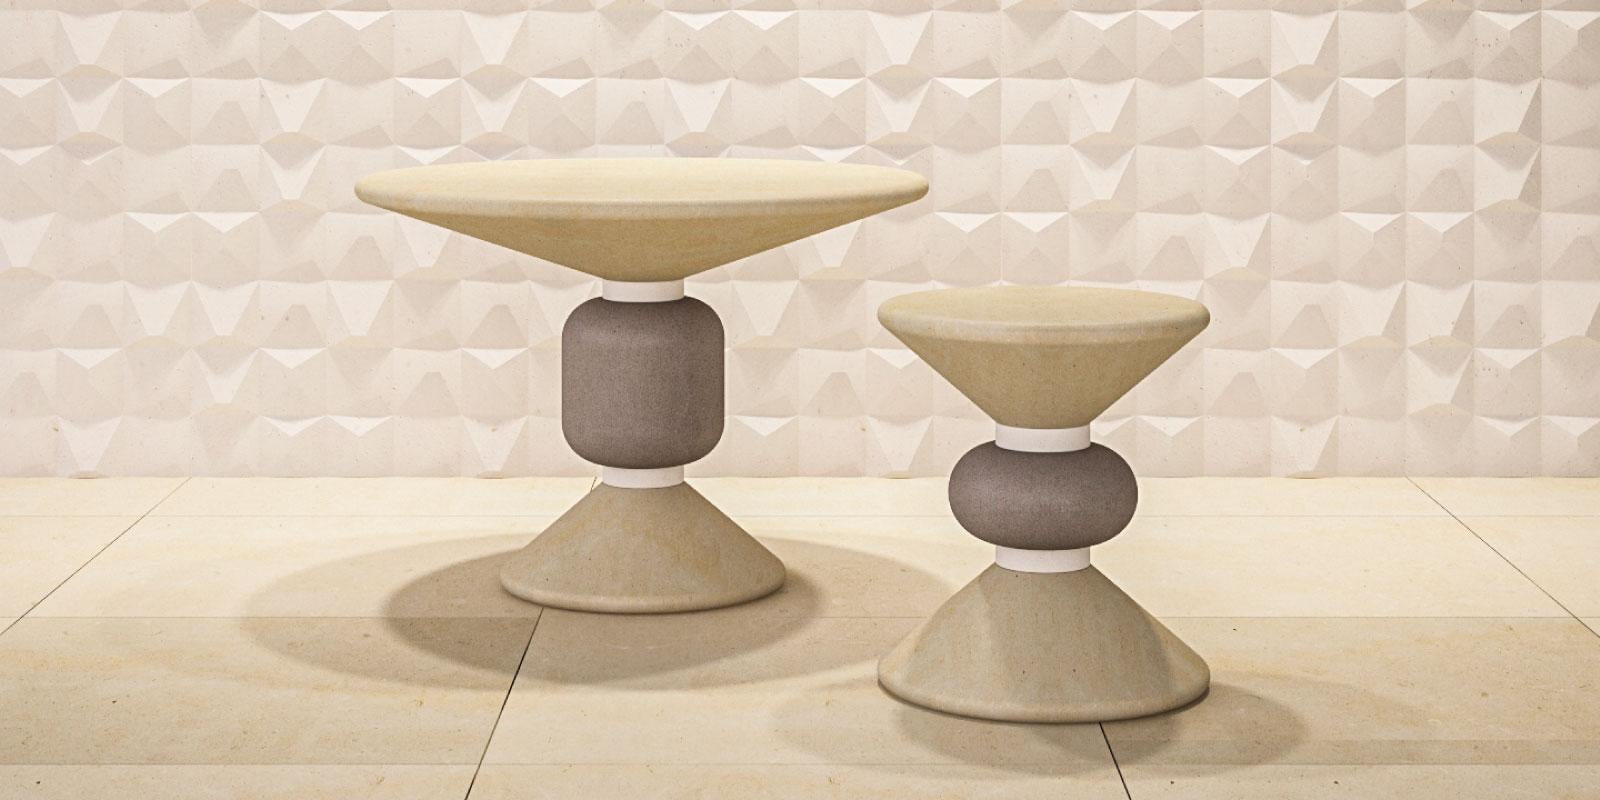 A pair of sculptural beige and grey tables crafted of Lime stone.
Suitable for both indoor and outdoor environments.
Large: ø 27.5